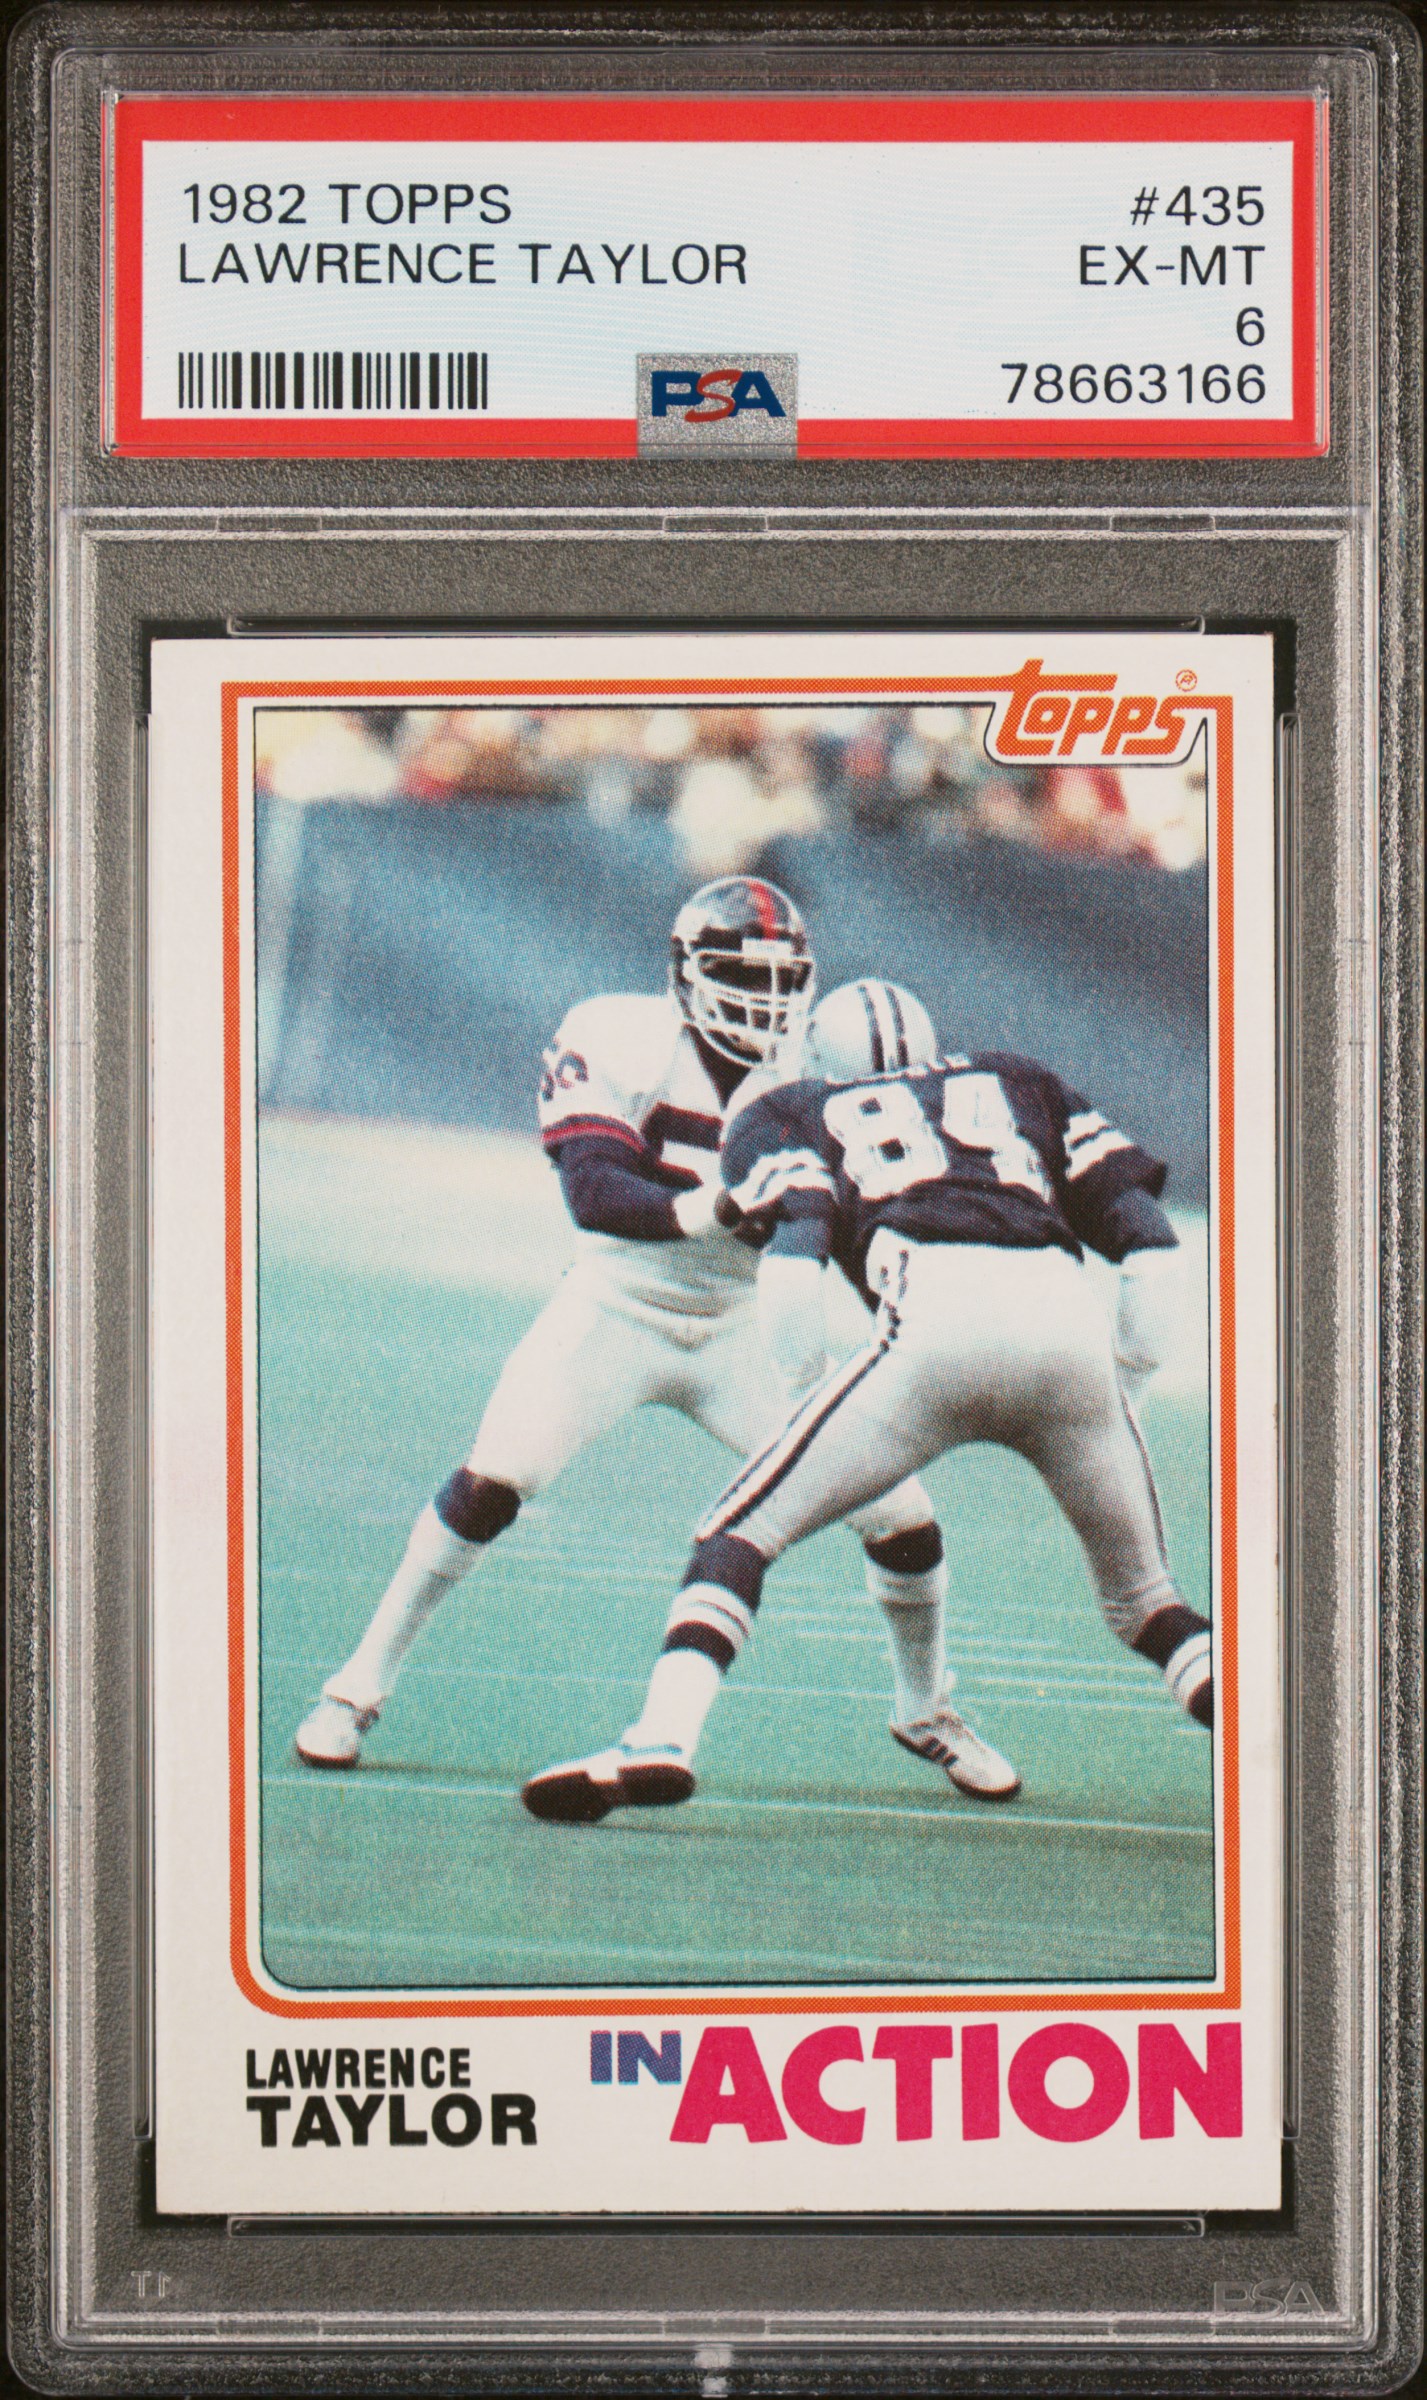 1982 Topps #435 Lawrence Taylor Rookie Card – PSA EX-MT 6